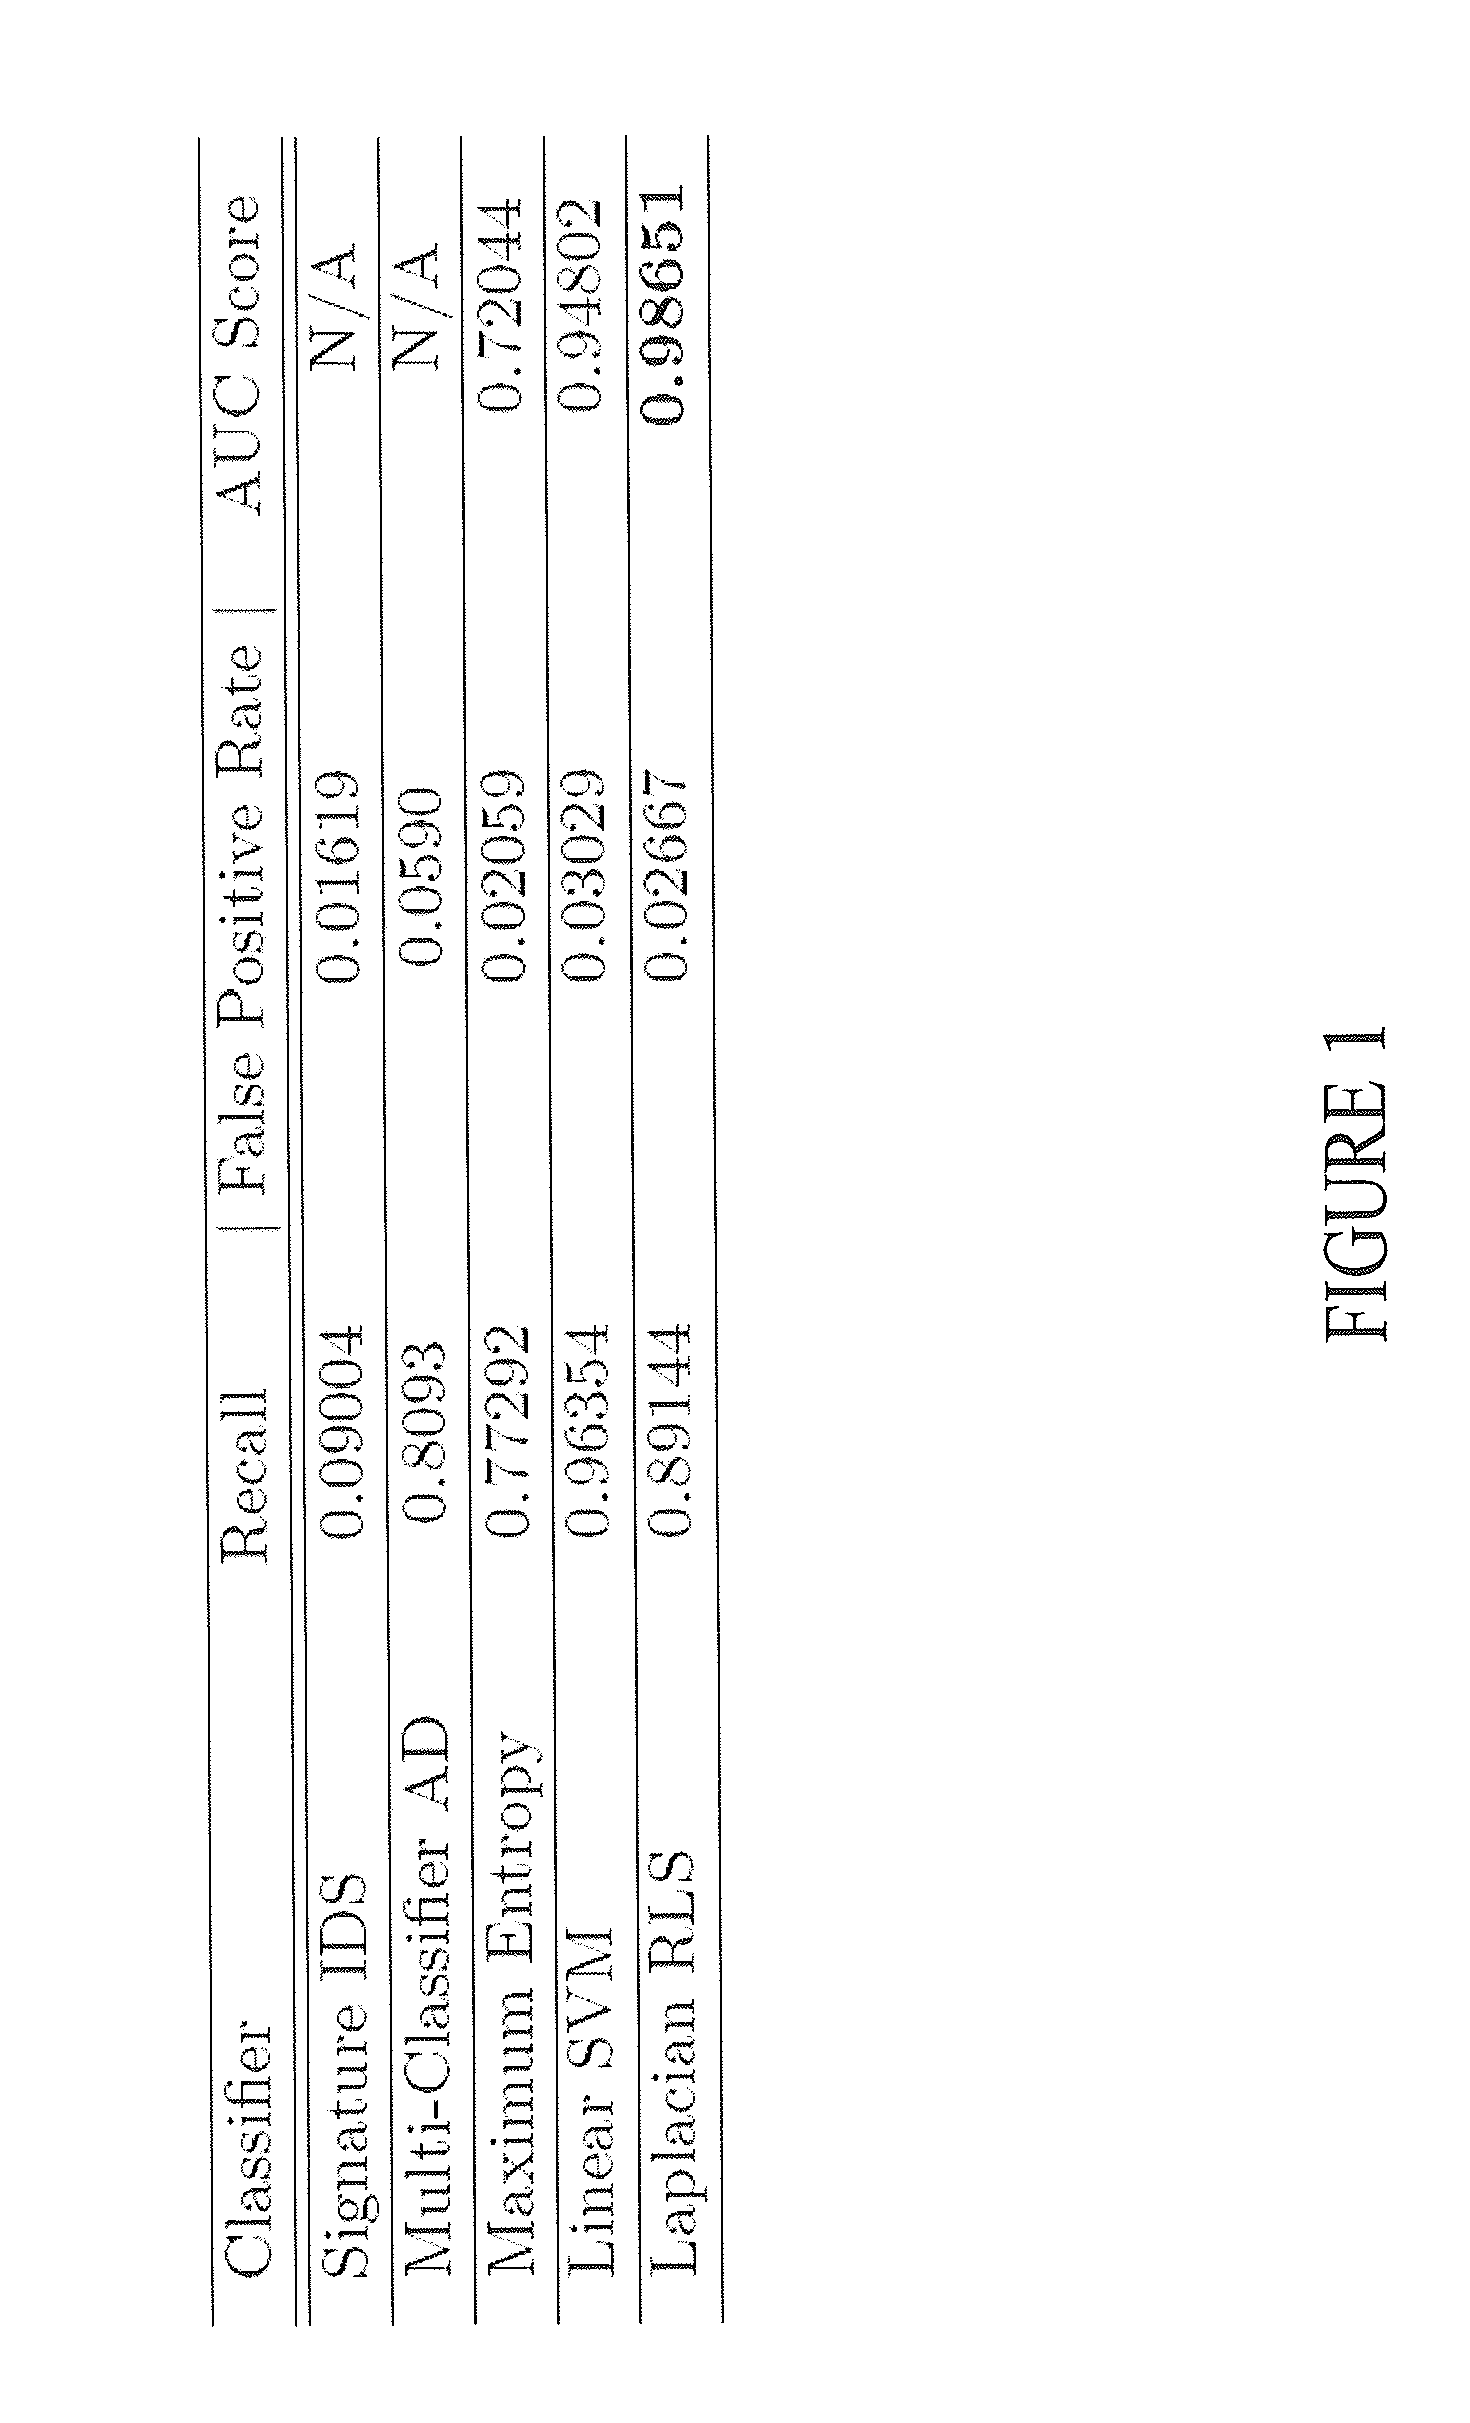 In-situ trainable intrusion detection system